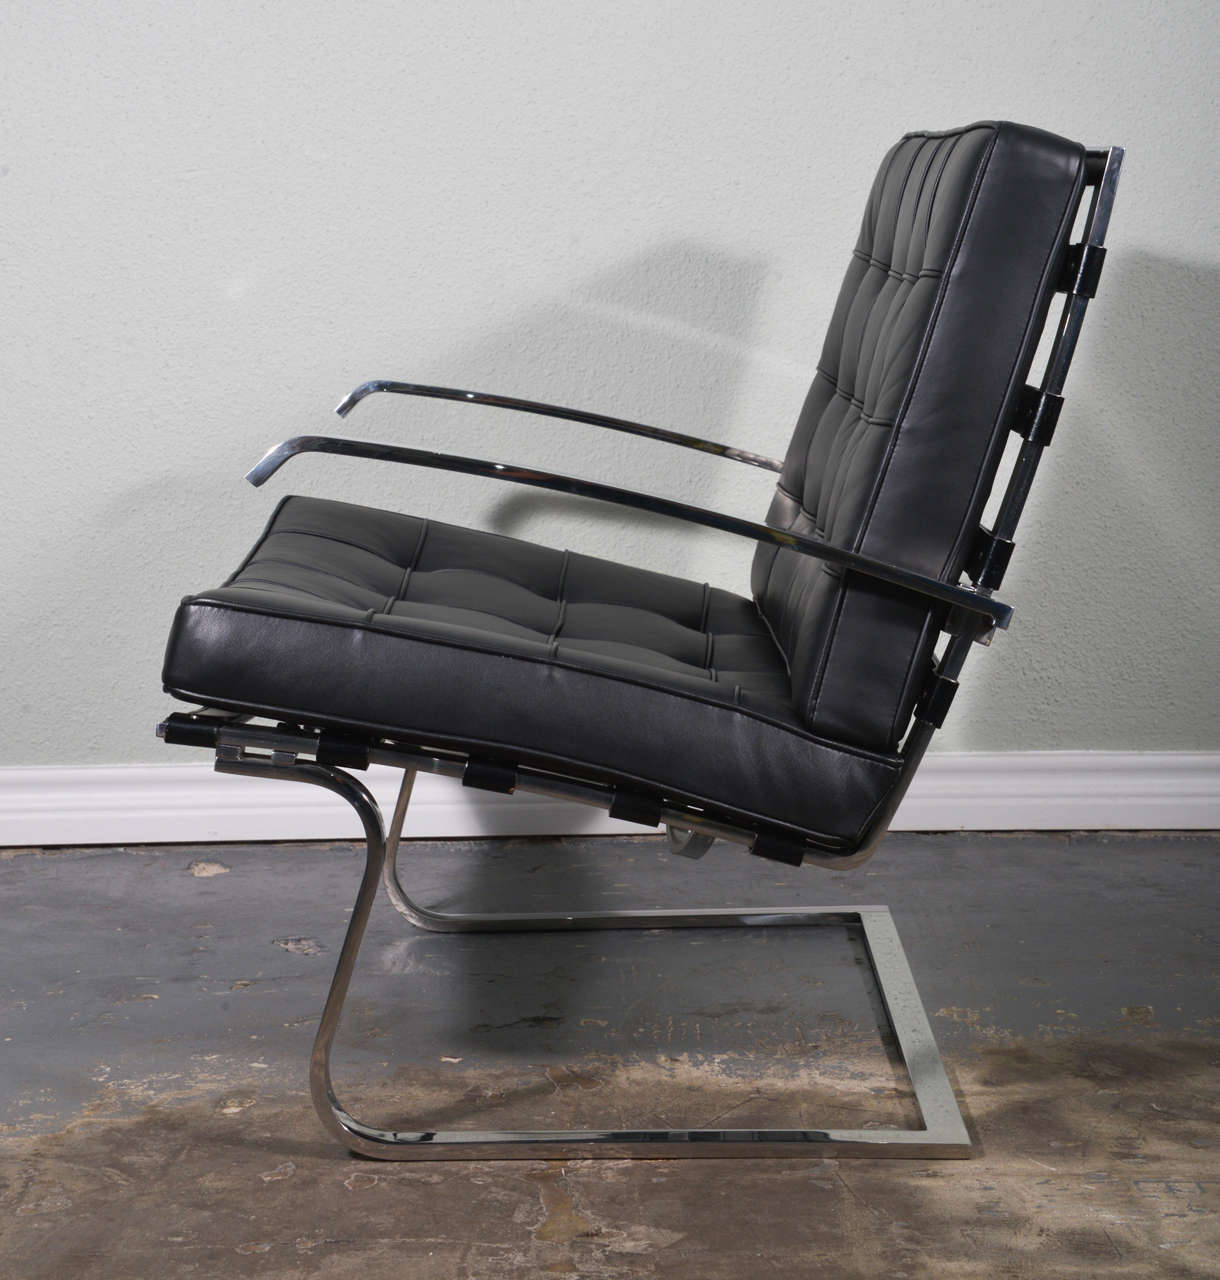 American Ludwig Mies van der Rohe Tugendhat lounge chair by Knoll